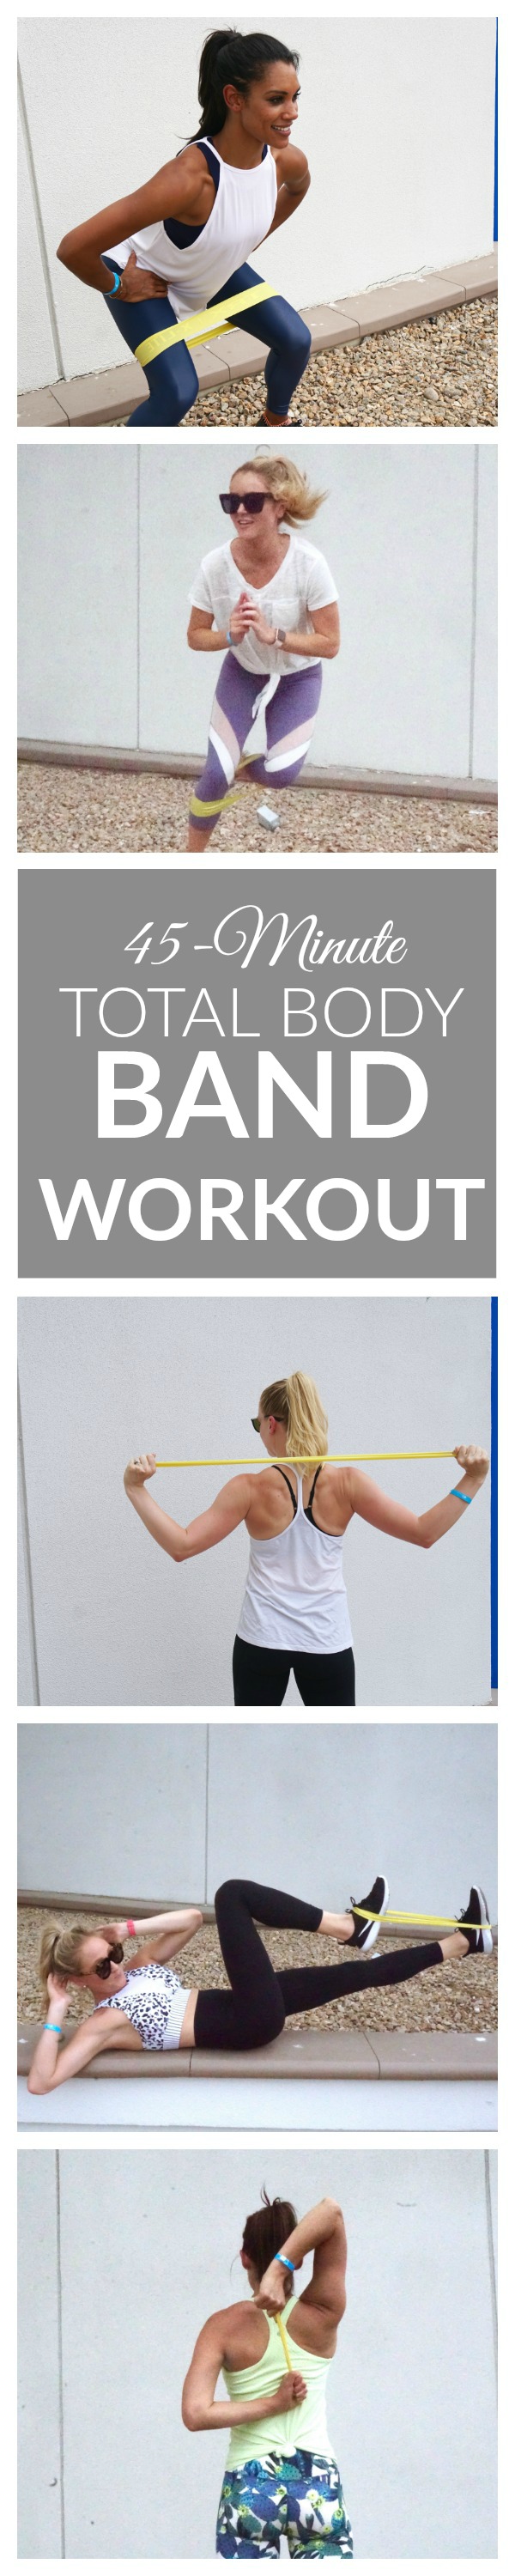 total-body-band-workout